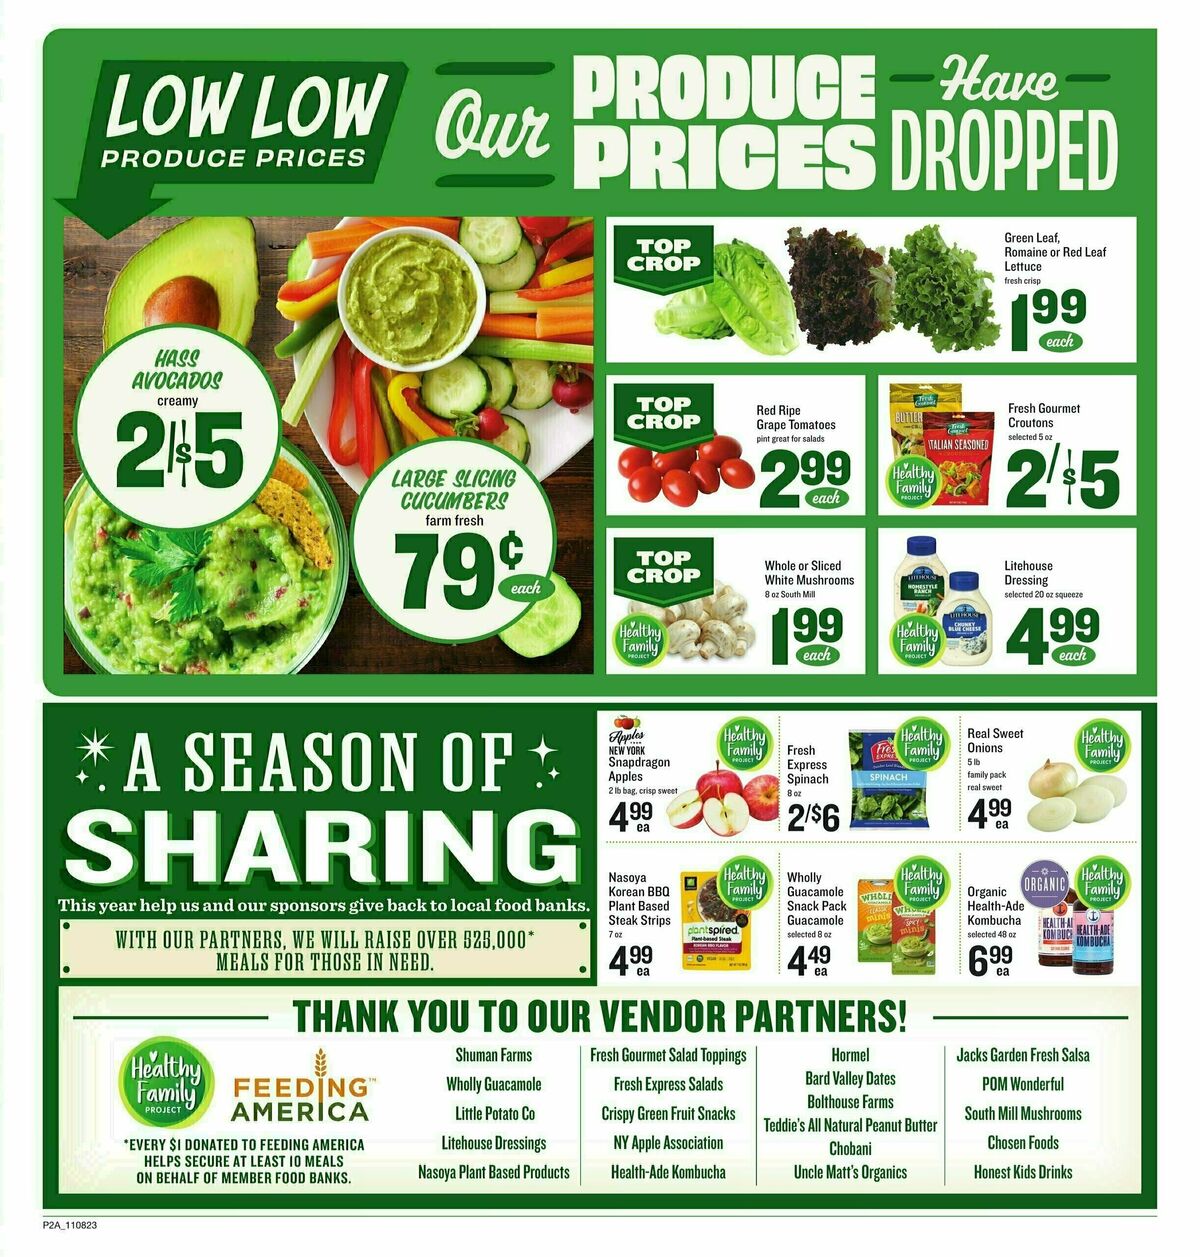 Lowes Foods Weekly Ad from November 8